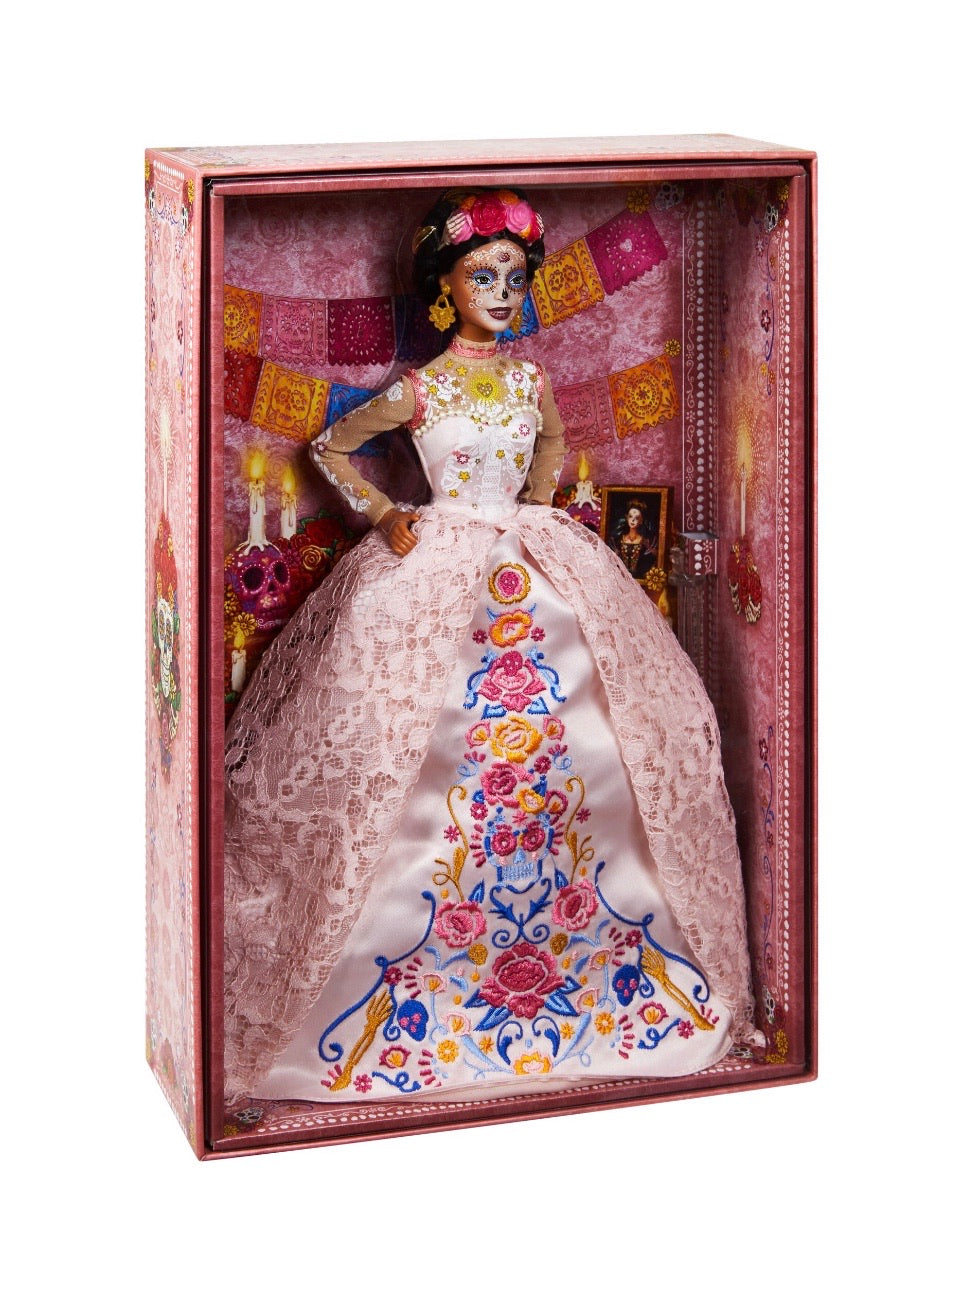 day of the dead barbie doll 2019 pre order